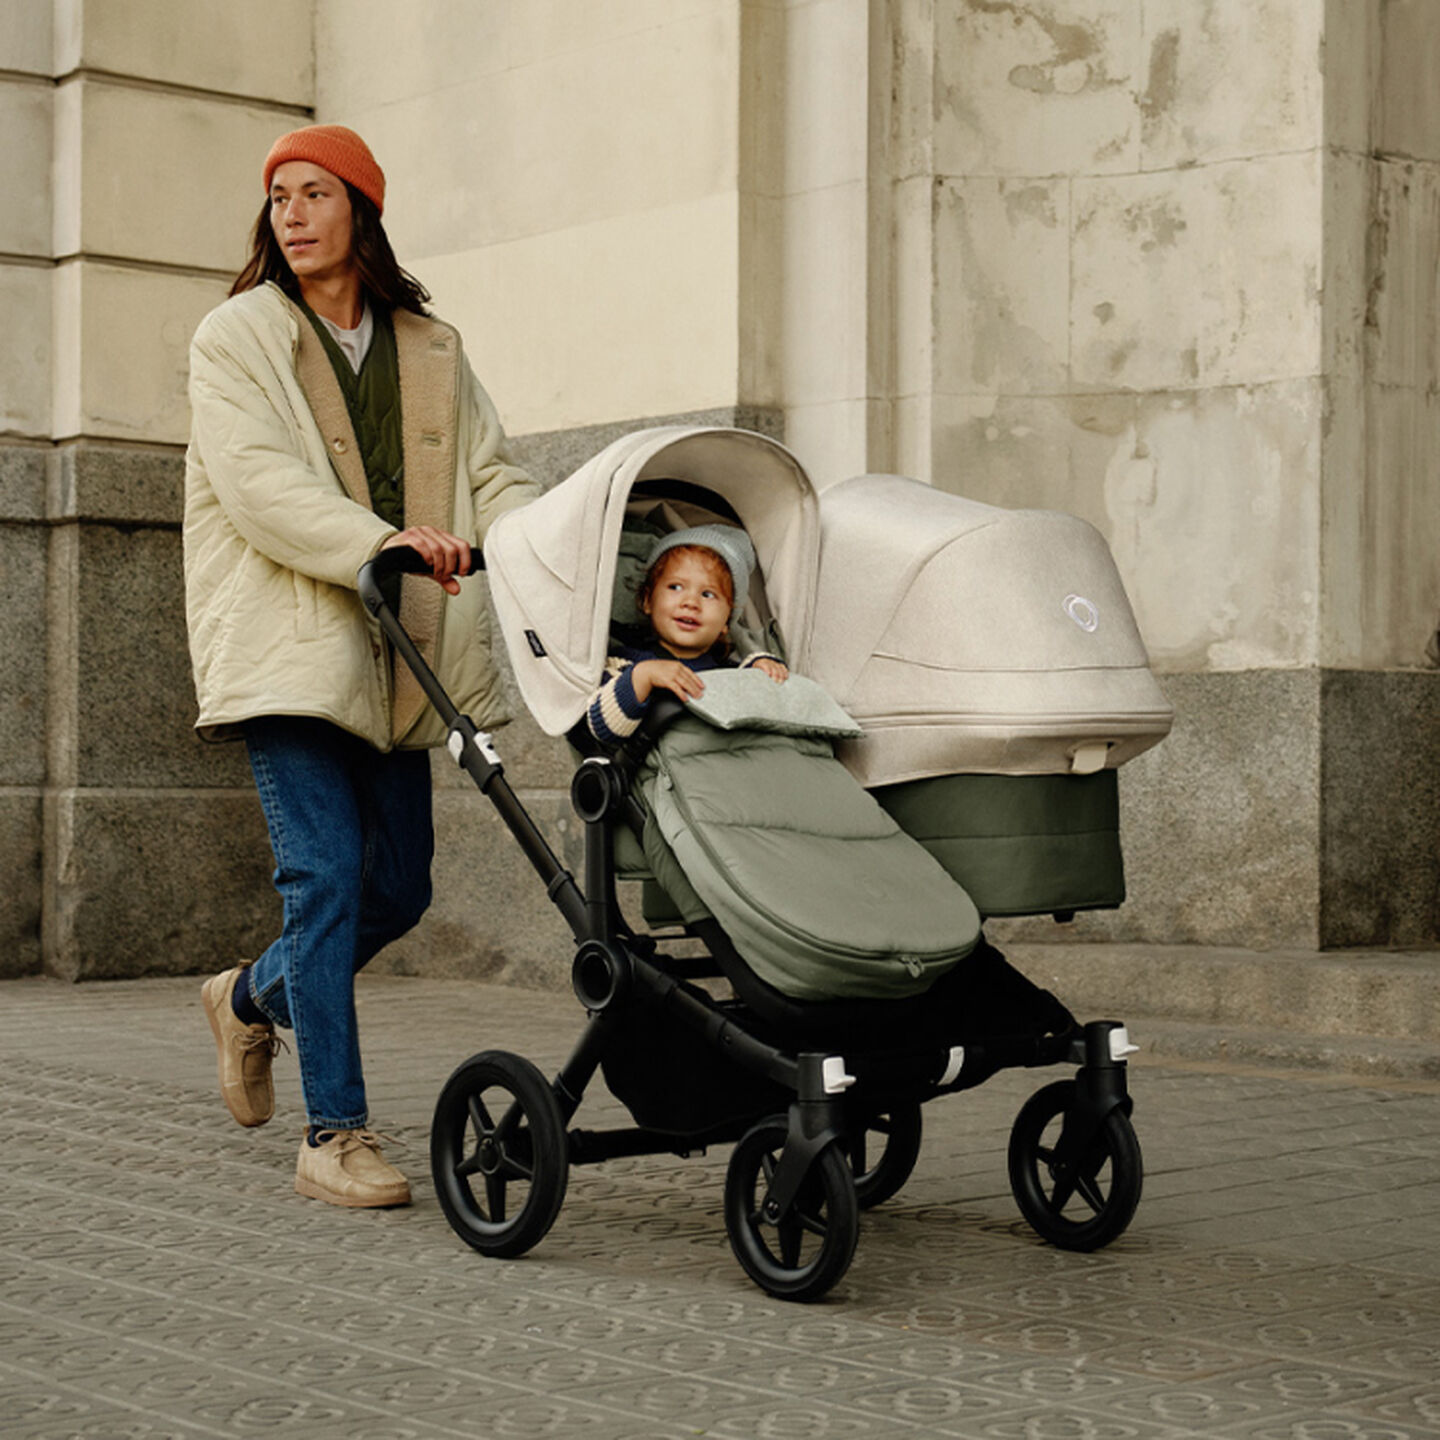 A father walks with his kids in the Bugaboo Donkey 5 Duo pushchair. His toddler sits on the left seat inside a footmuff. The carrycot on the right faces the other way, showing the Bugaboo logo on the canopy.